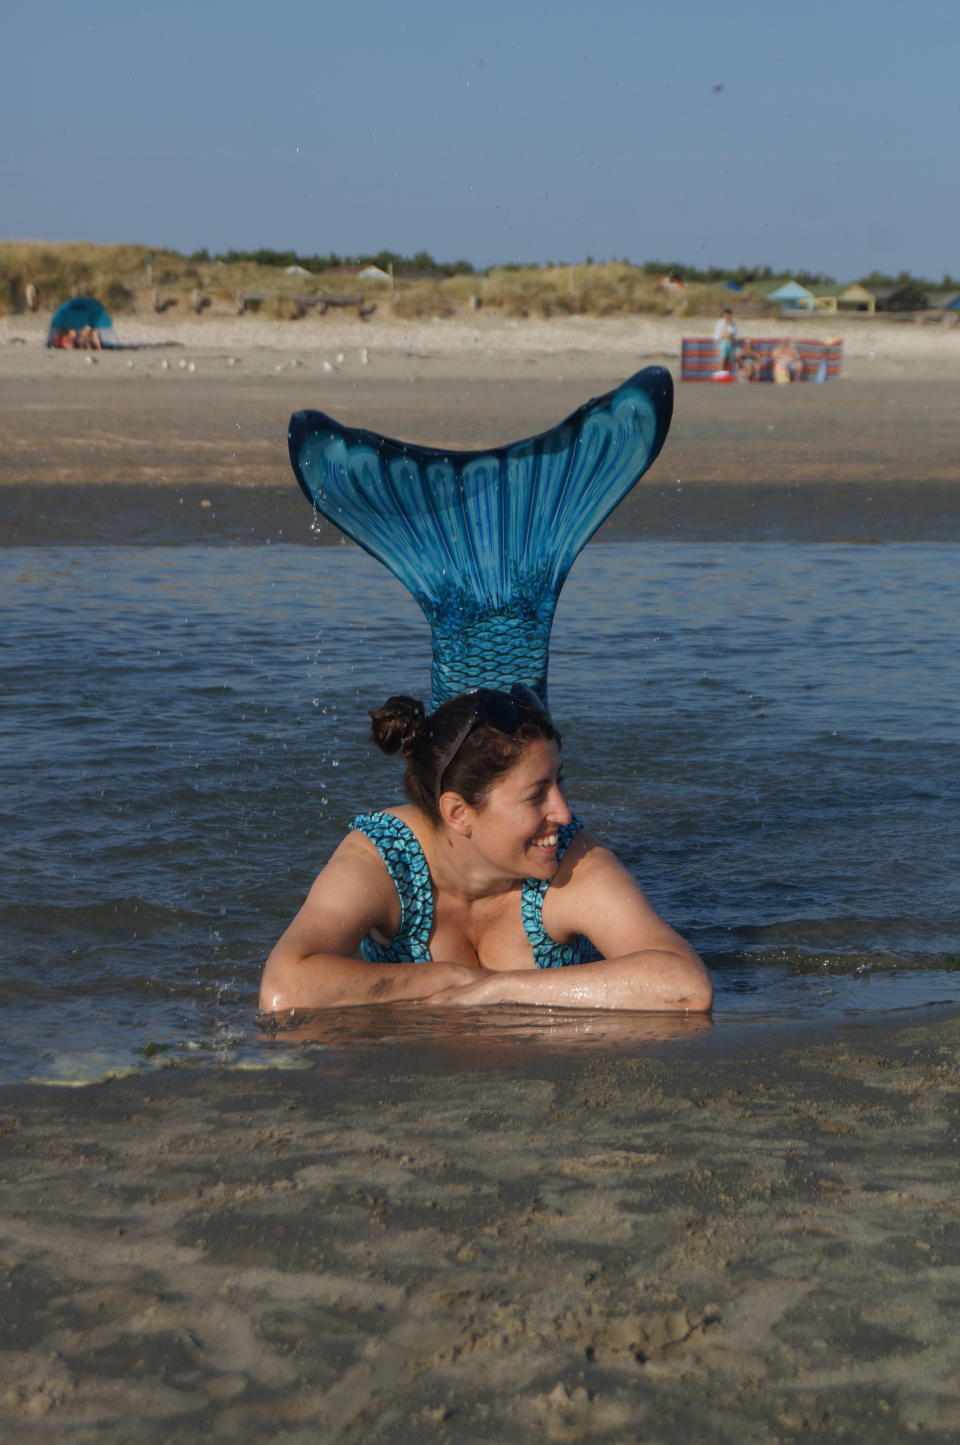                                Anna, the Little Mermaid of the South Coast (Supplied, South Coast Mermaids)